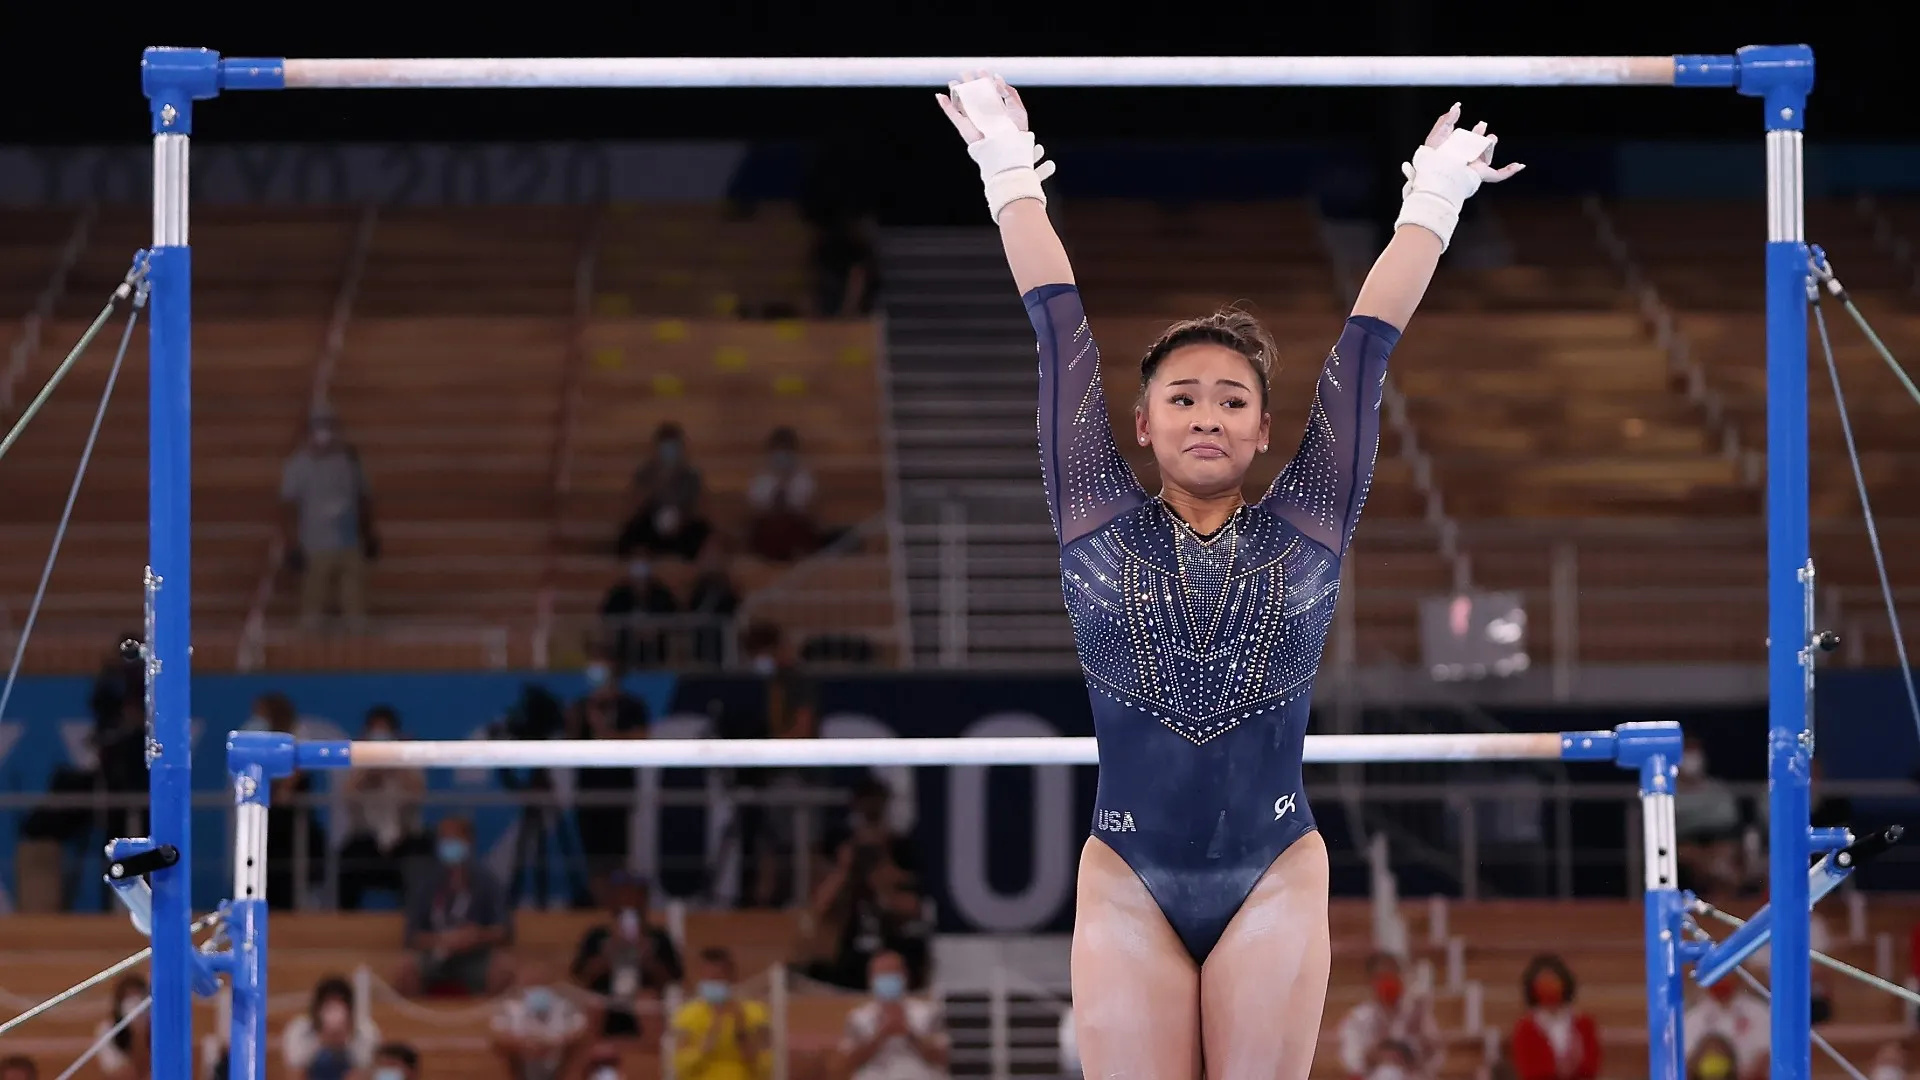 Uneven Bars: Suni Lee, UB performance, The first Olympic gymnast to compete in college. 1920x1080 Full HD Wallpaper.